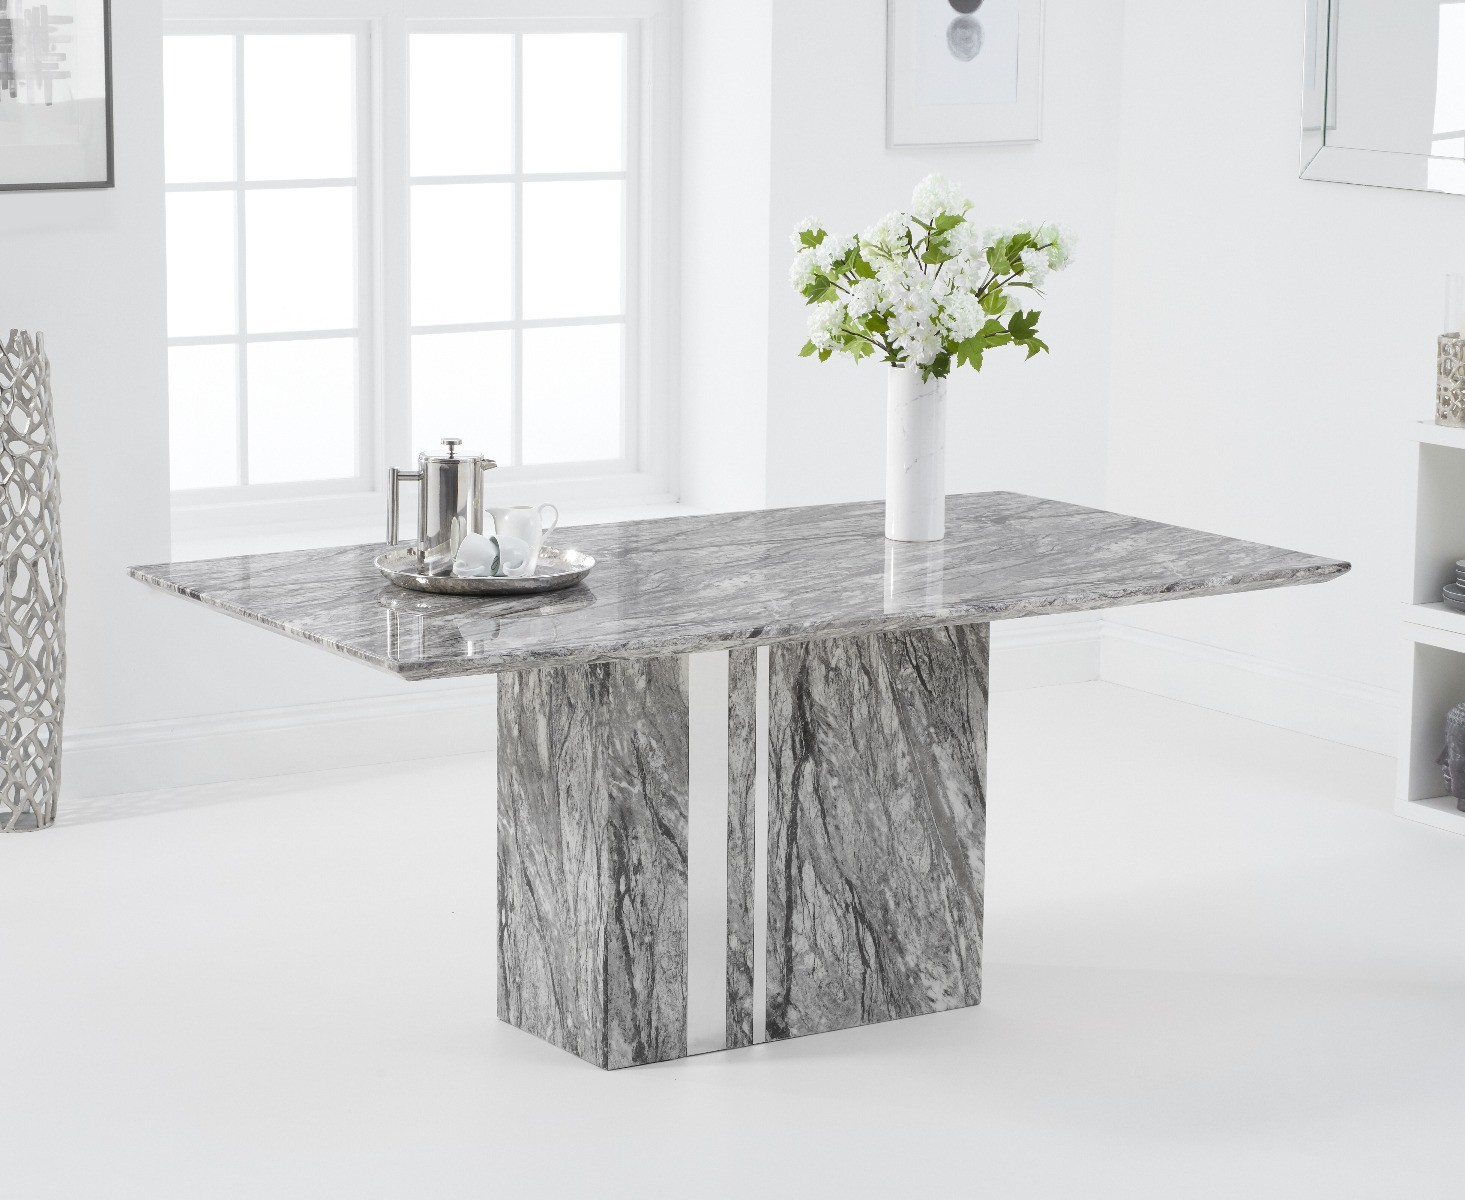 Photo 2 of Alicia 180cm grey marble dining table with 4 black austin chairs